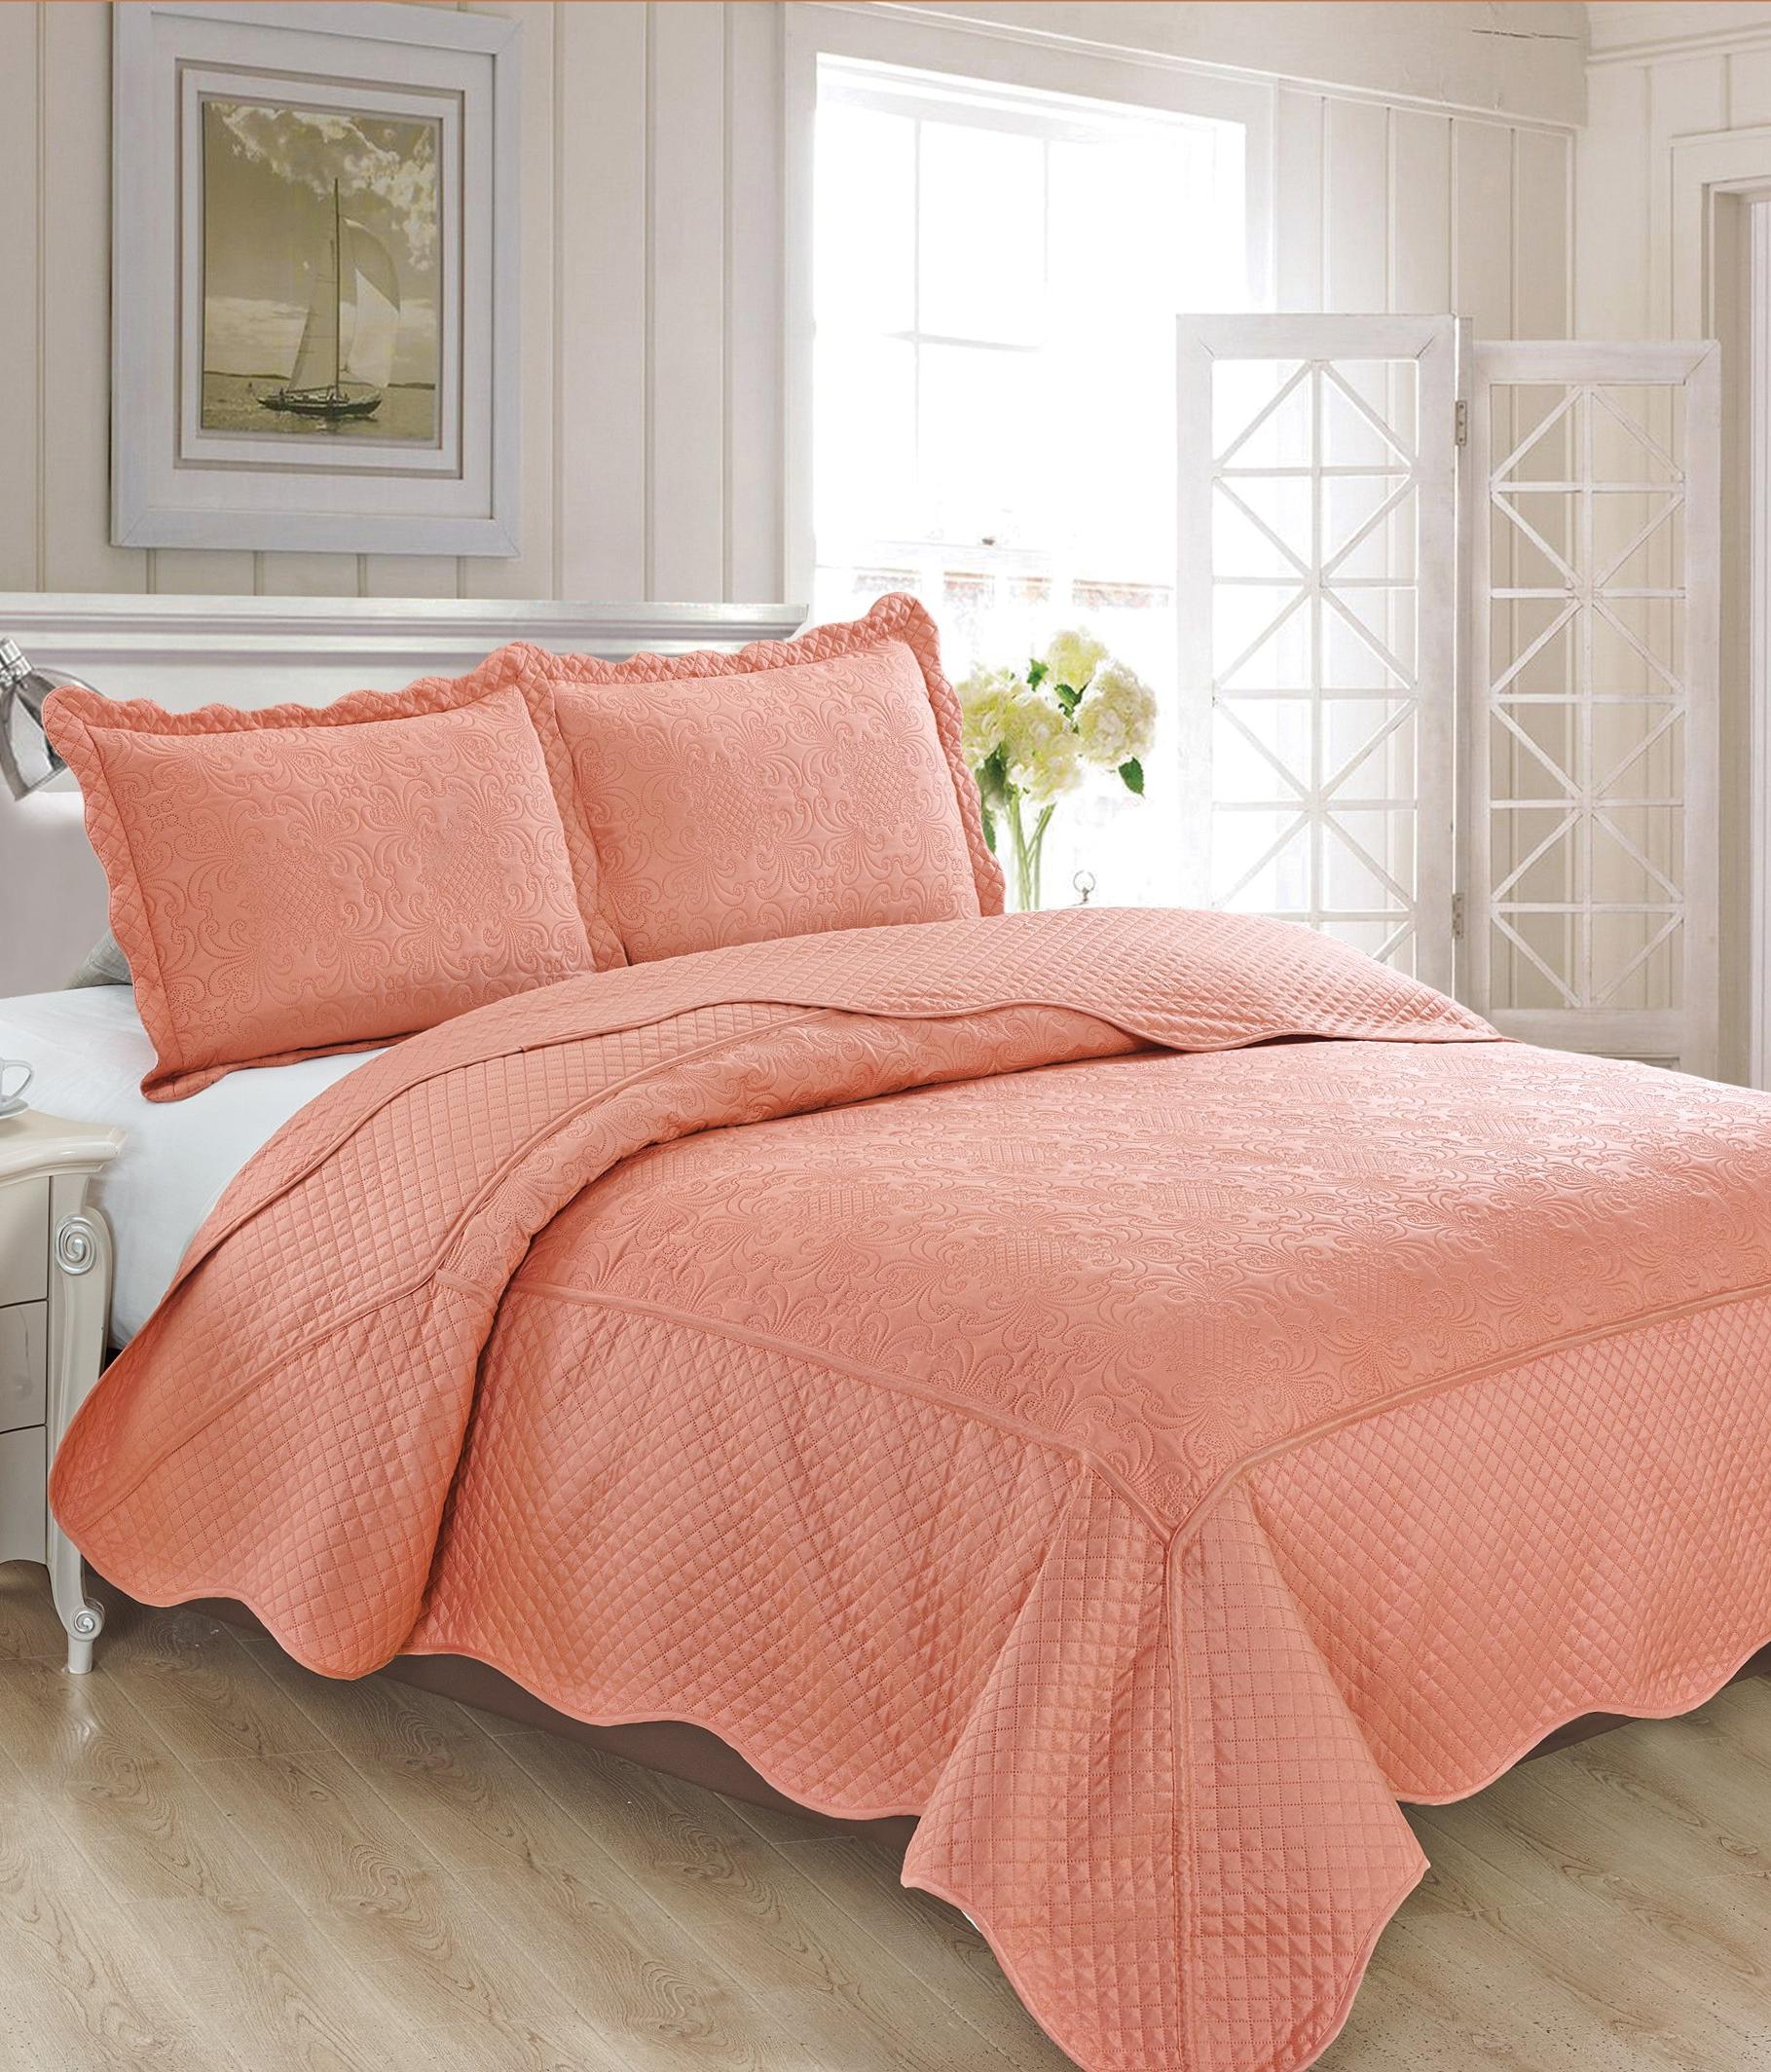 Fancy Collection 3pc Luxury Bedspread Coverlet Embossed Bed Cover Solid Size Veronica Coral King California King OTElMkJ6ZHRzUDRJTA 